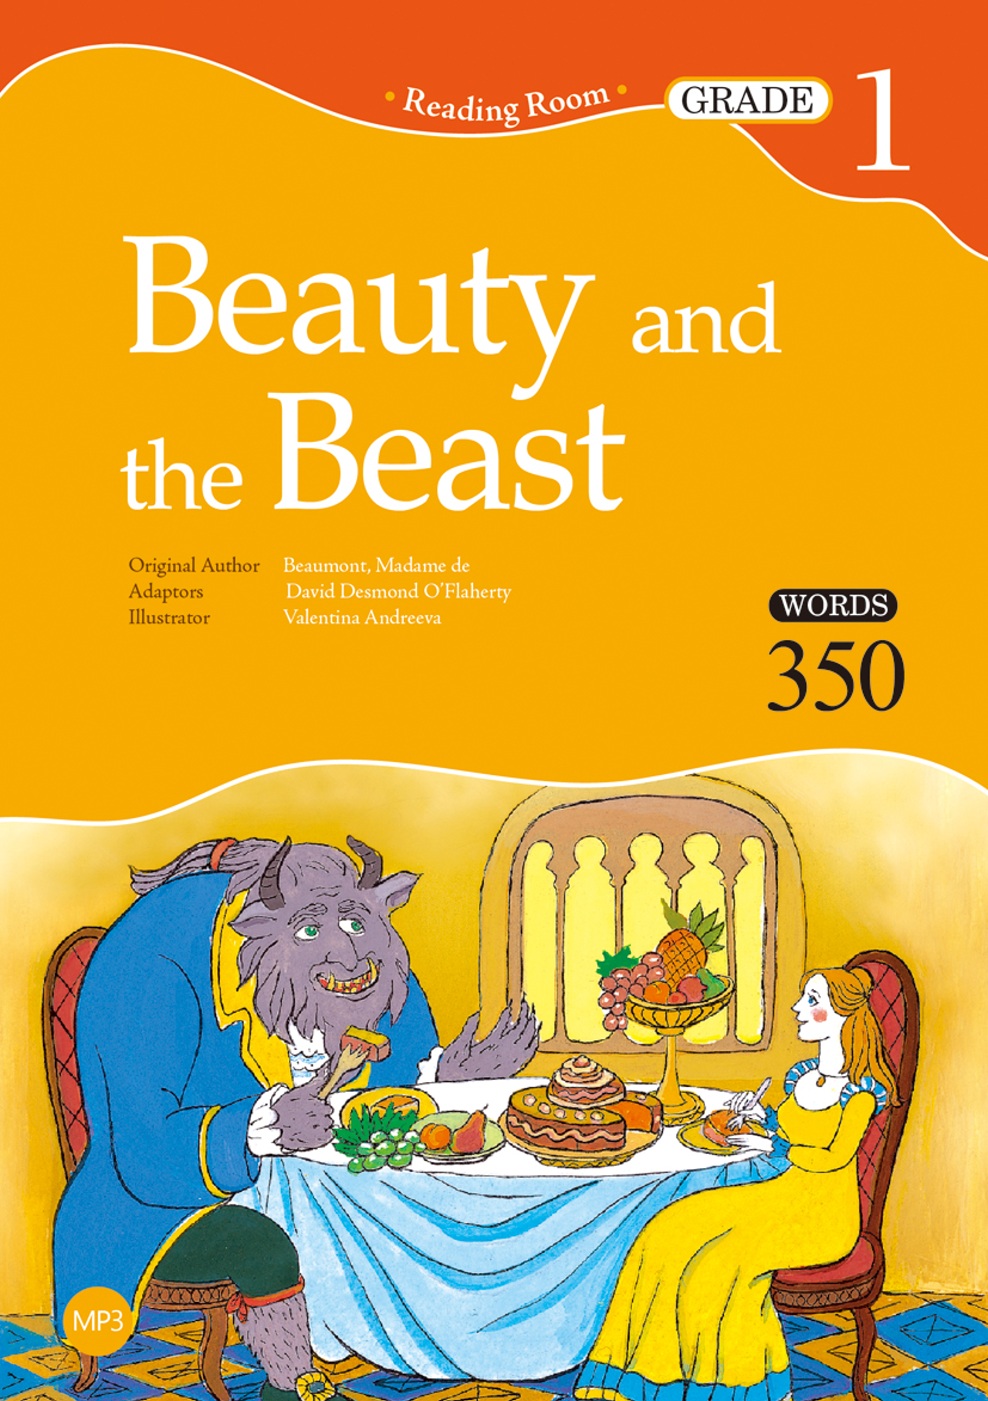 Beauty and the Beast【Grade 1】（...